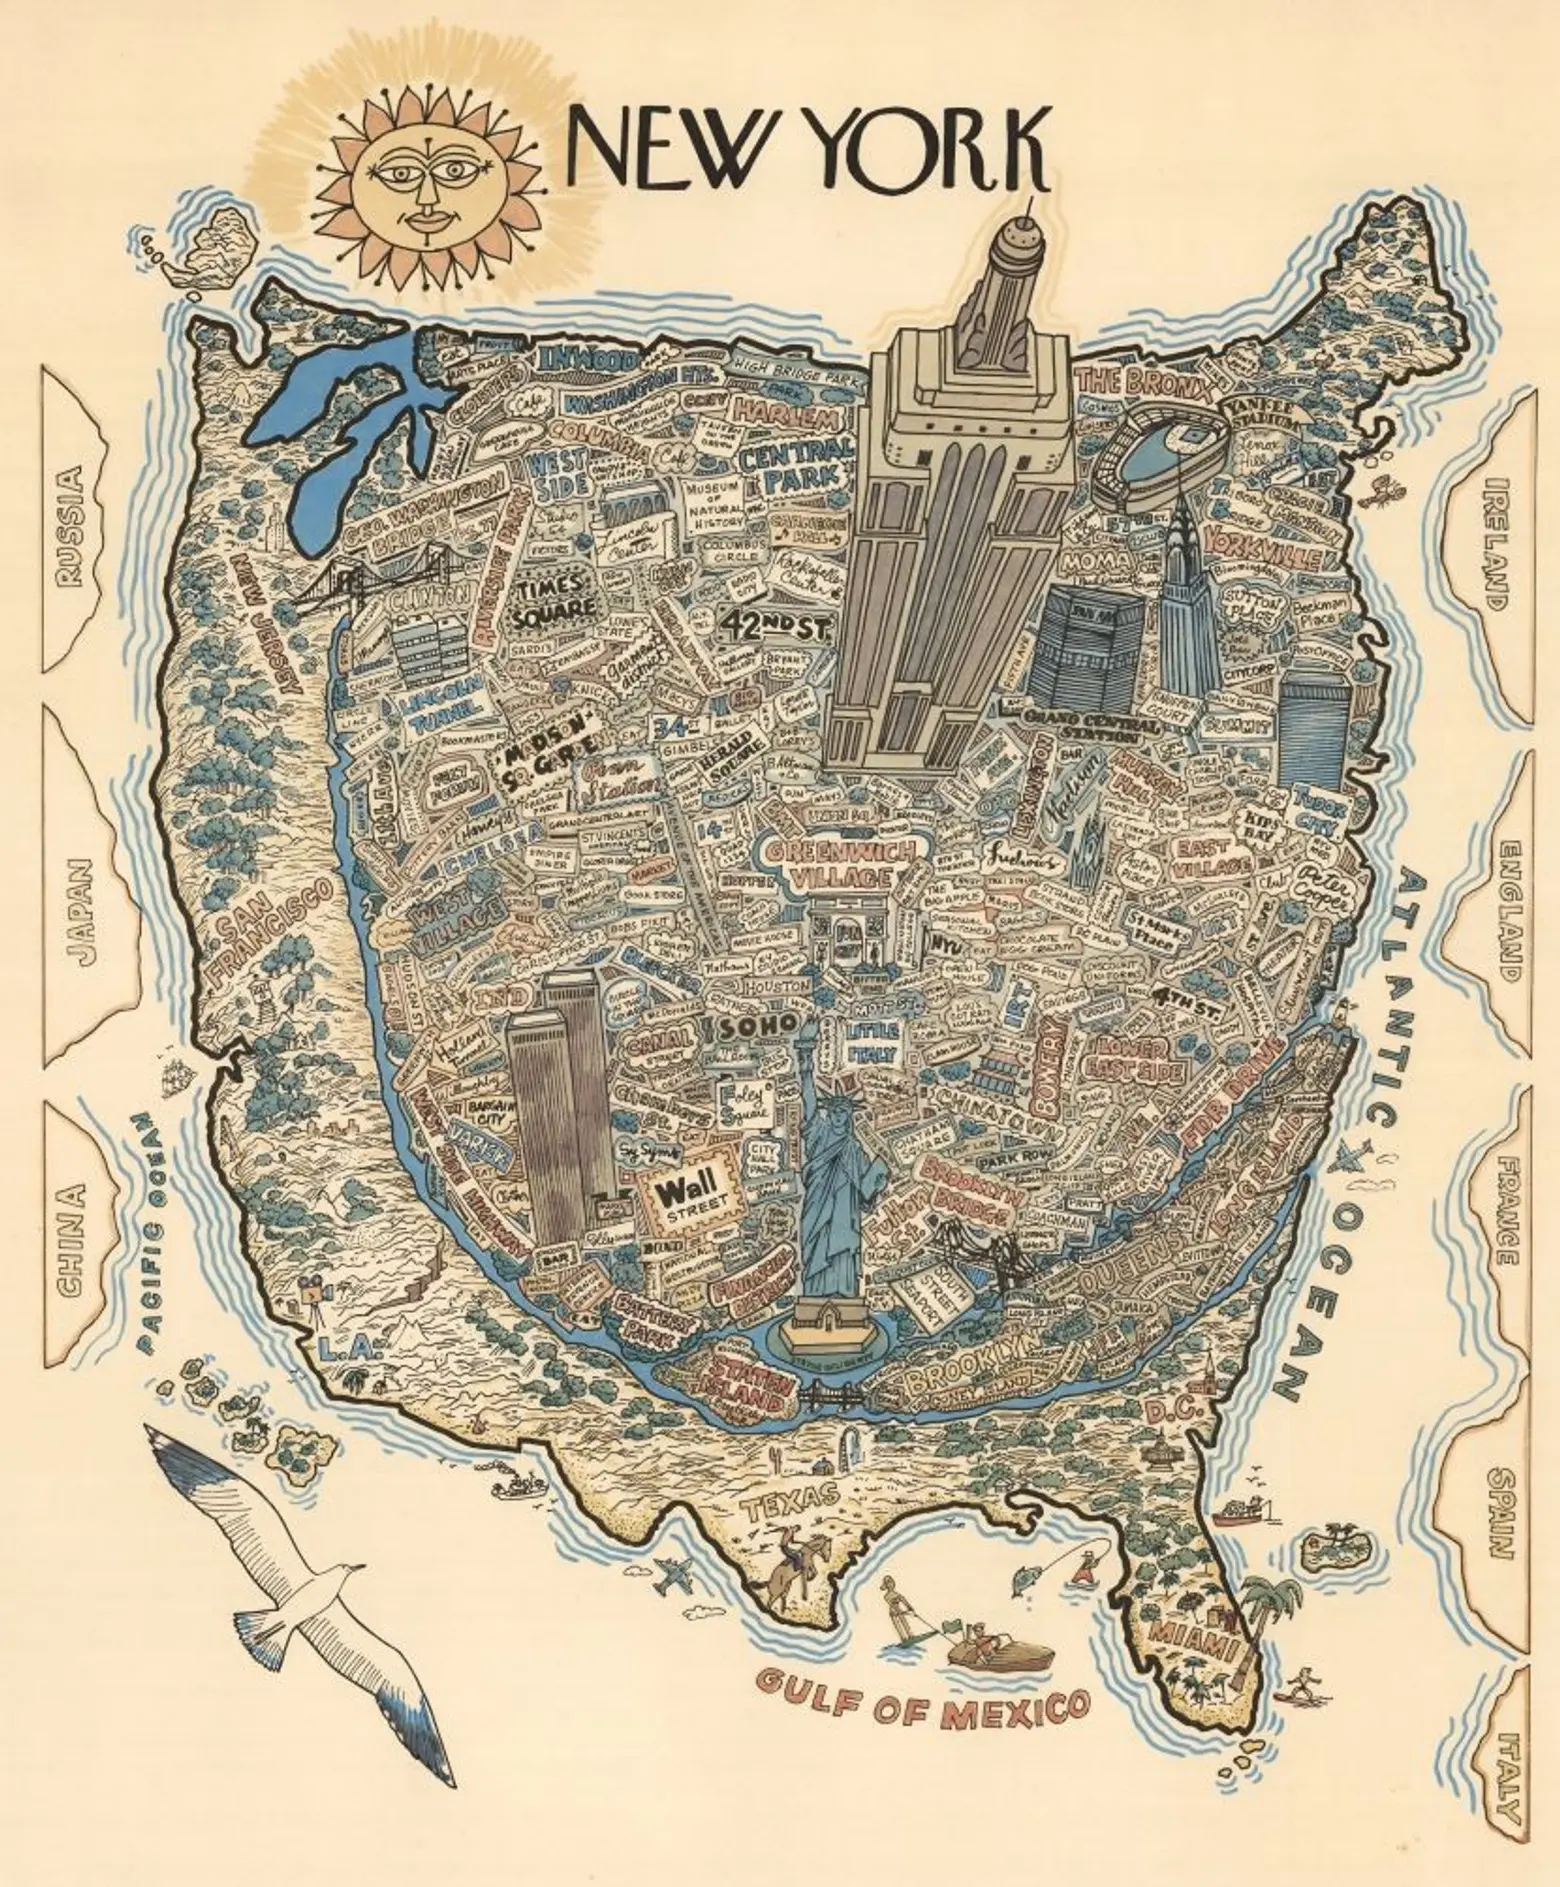 nyc worldview, nyc as center of the world, greatest city on earth, map of nyc